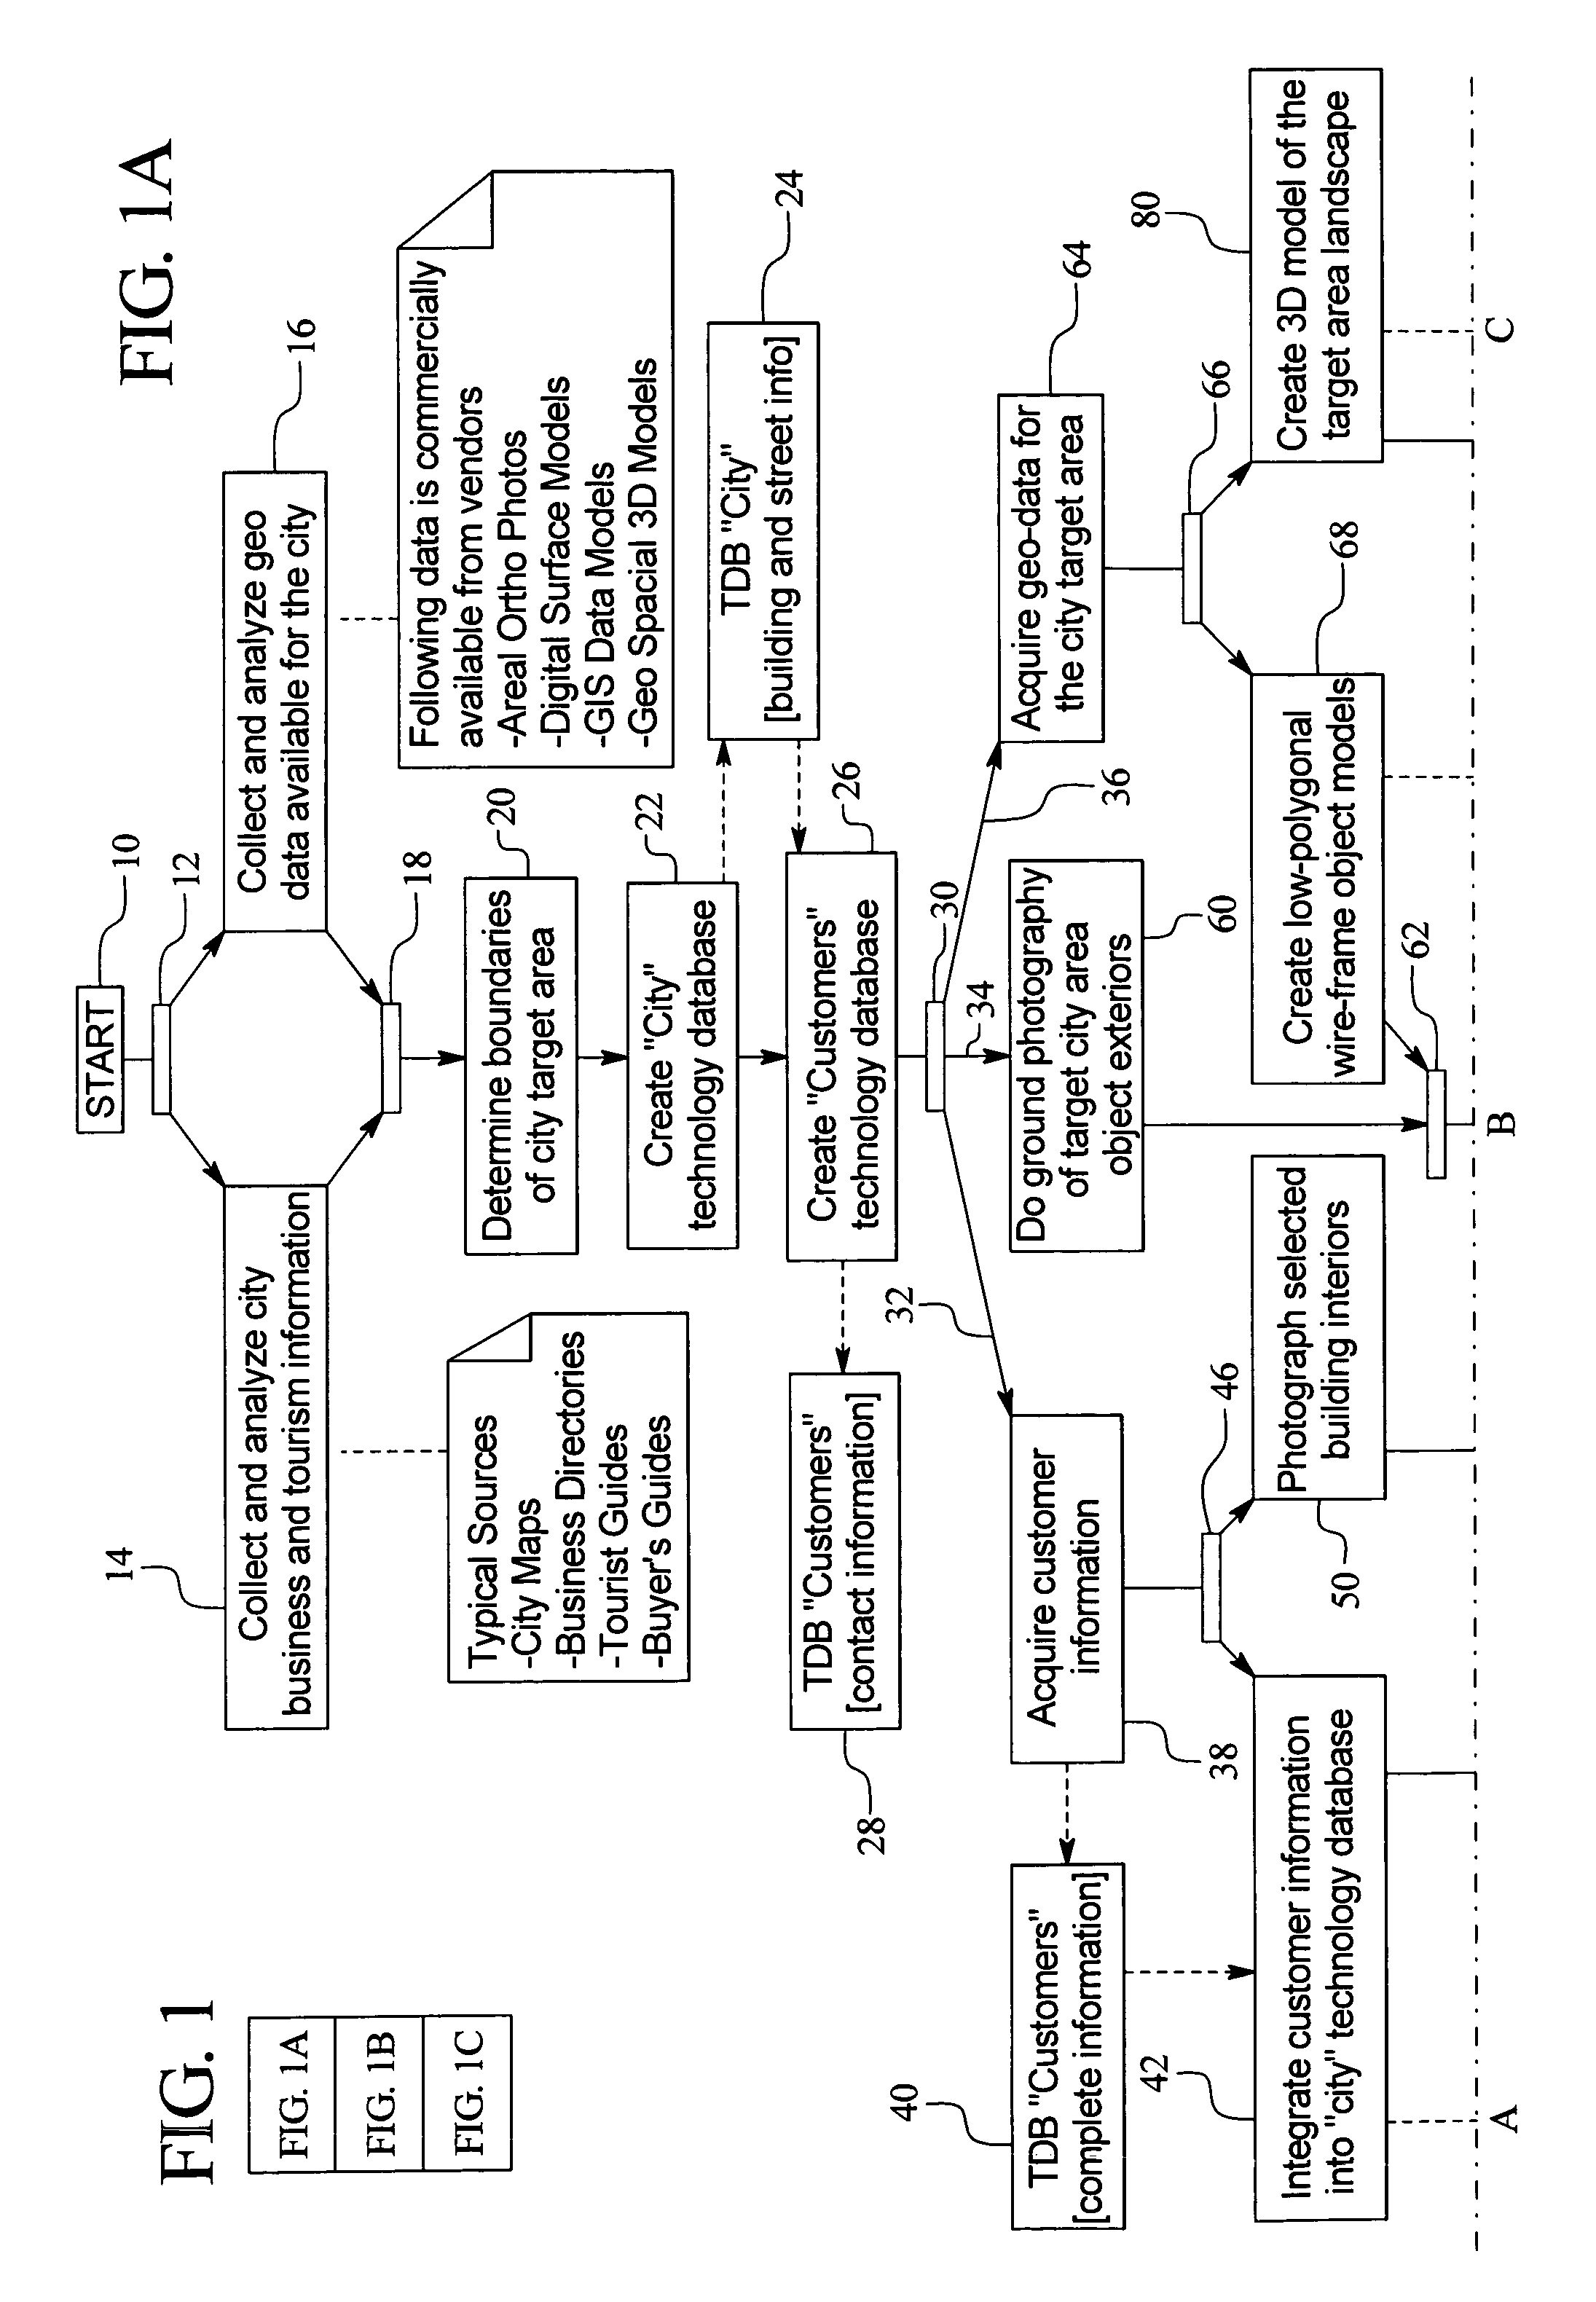 Apparatus and method for creating a virtual three-dimensional environment, and method of generating revenue therefrom